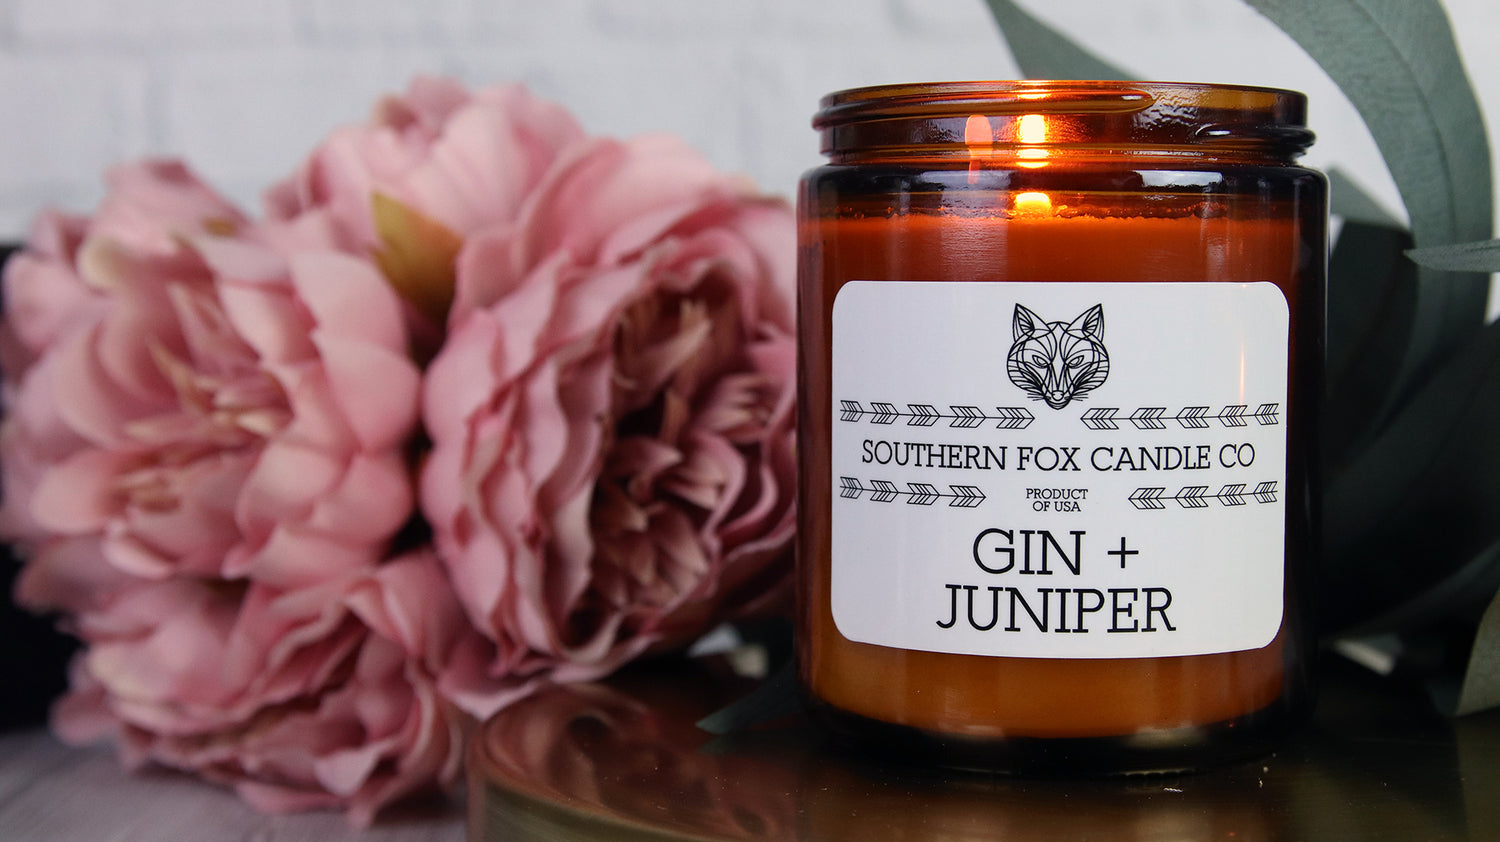 White vinyl candle labels with rounded corners with gin and juniper design applied to an amber candle jar